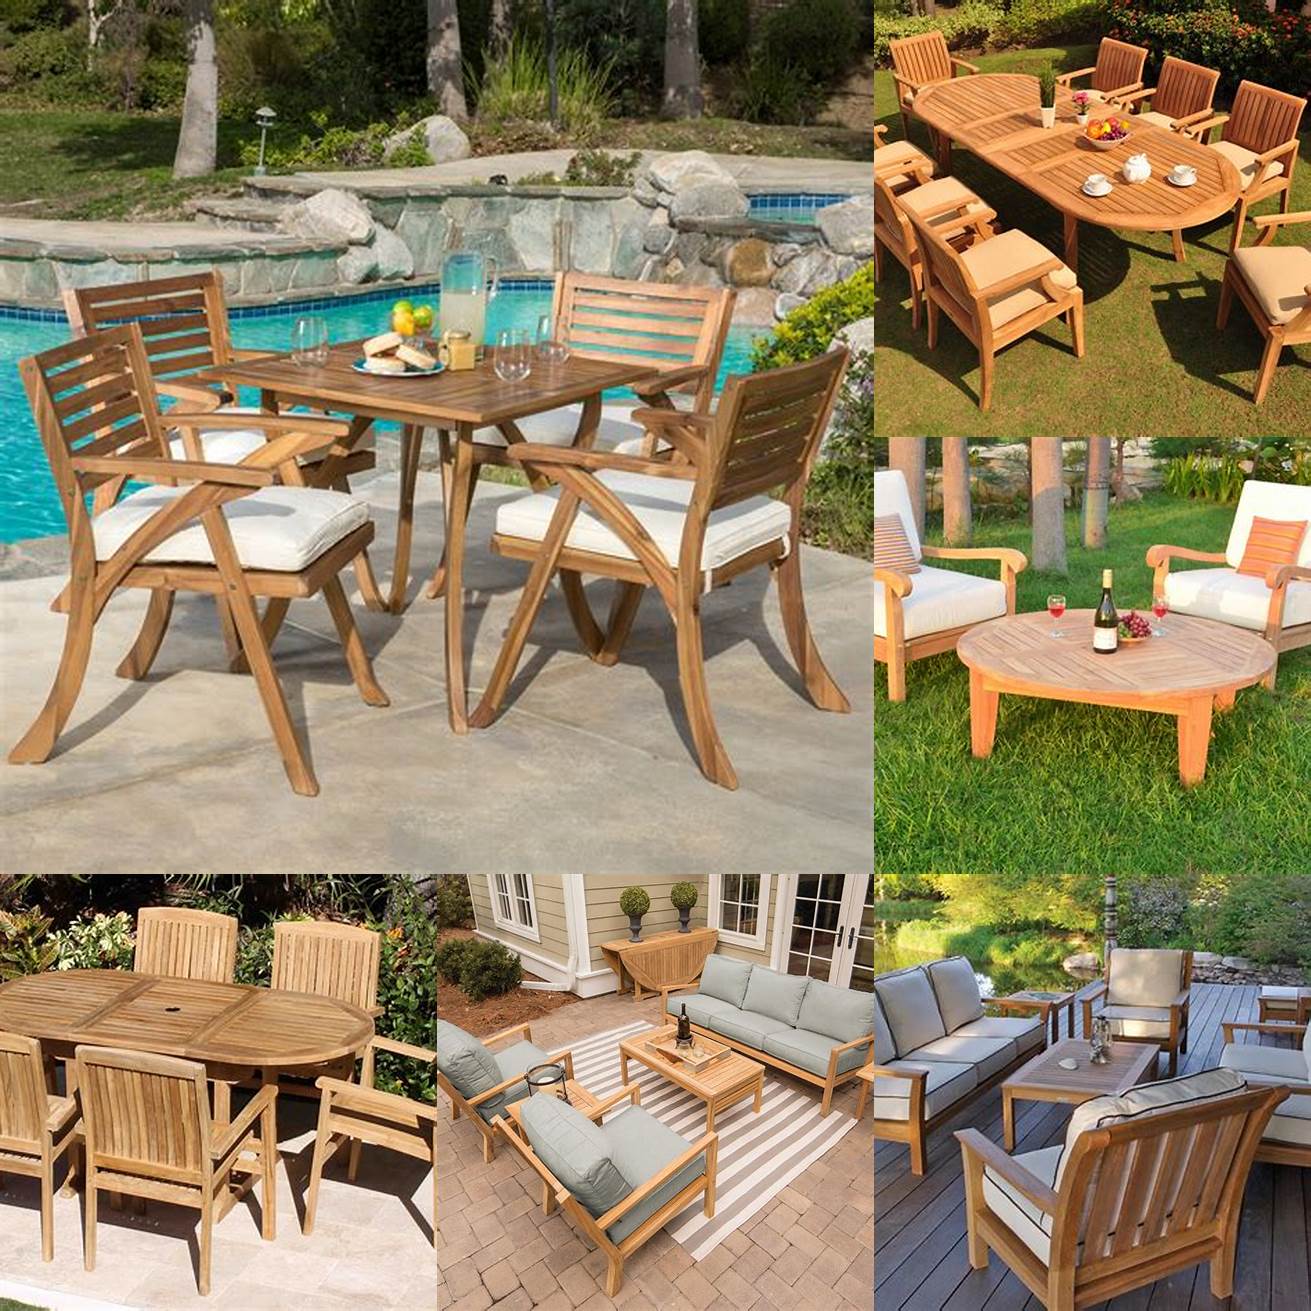 Outdoor Setting with Teak Furniture